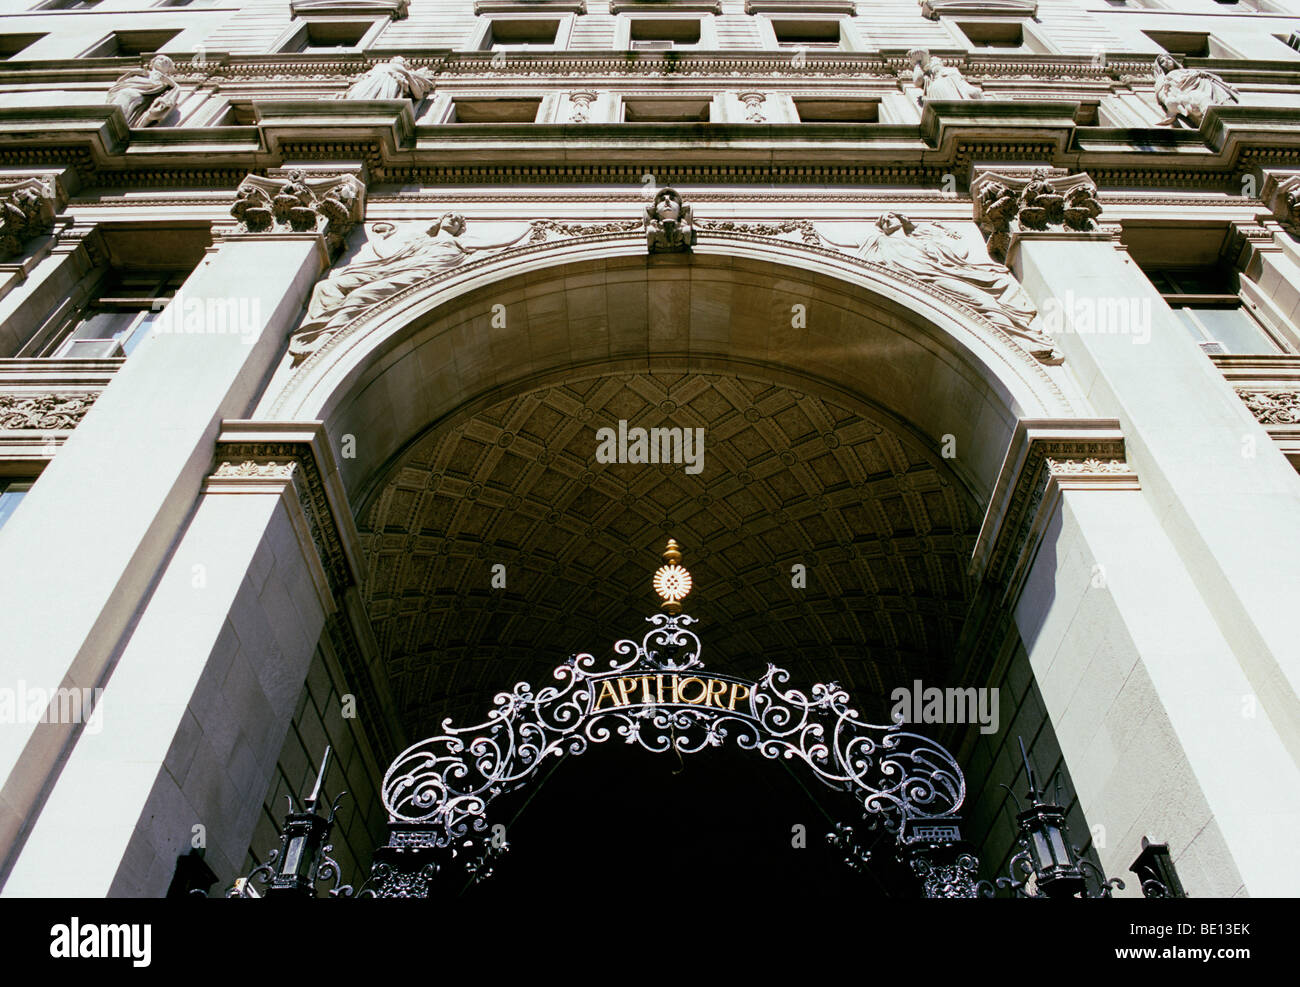 The Apthorp residential apartment building on Broadway in New York City Upper West Side New York, USA Ornate metal arch over entrance. Astor residence Stock Photo